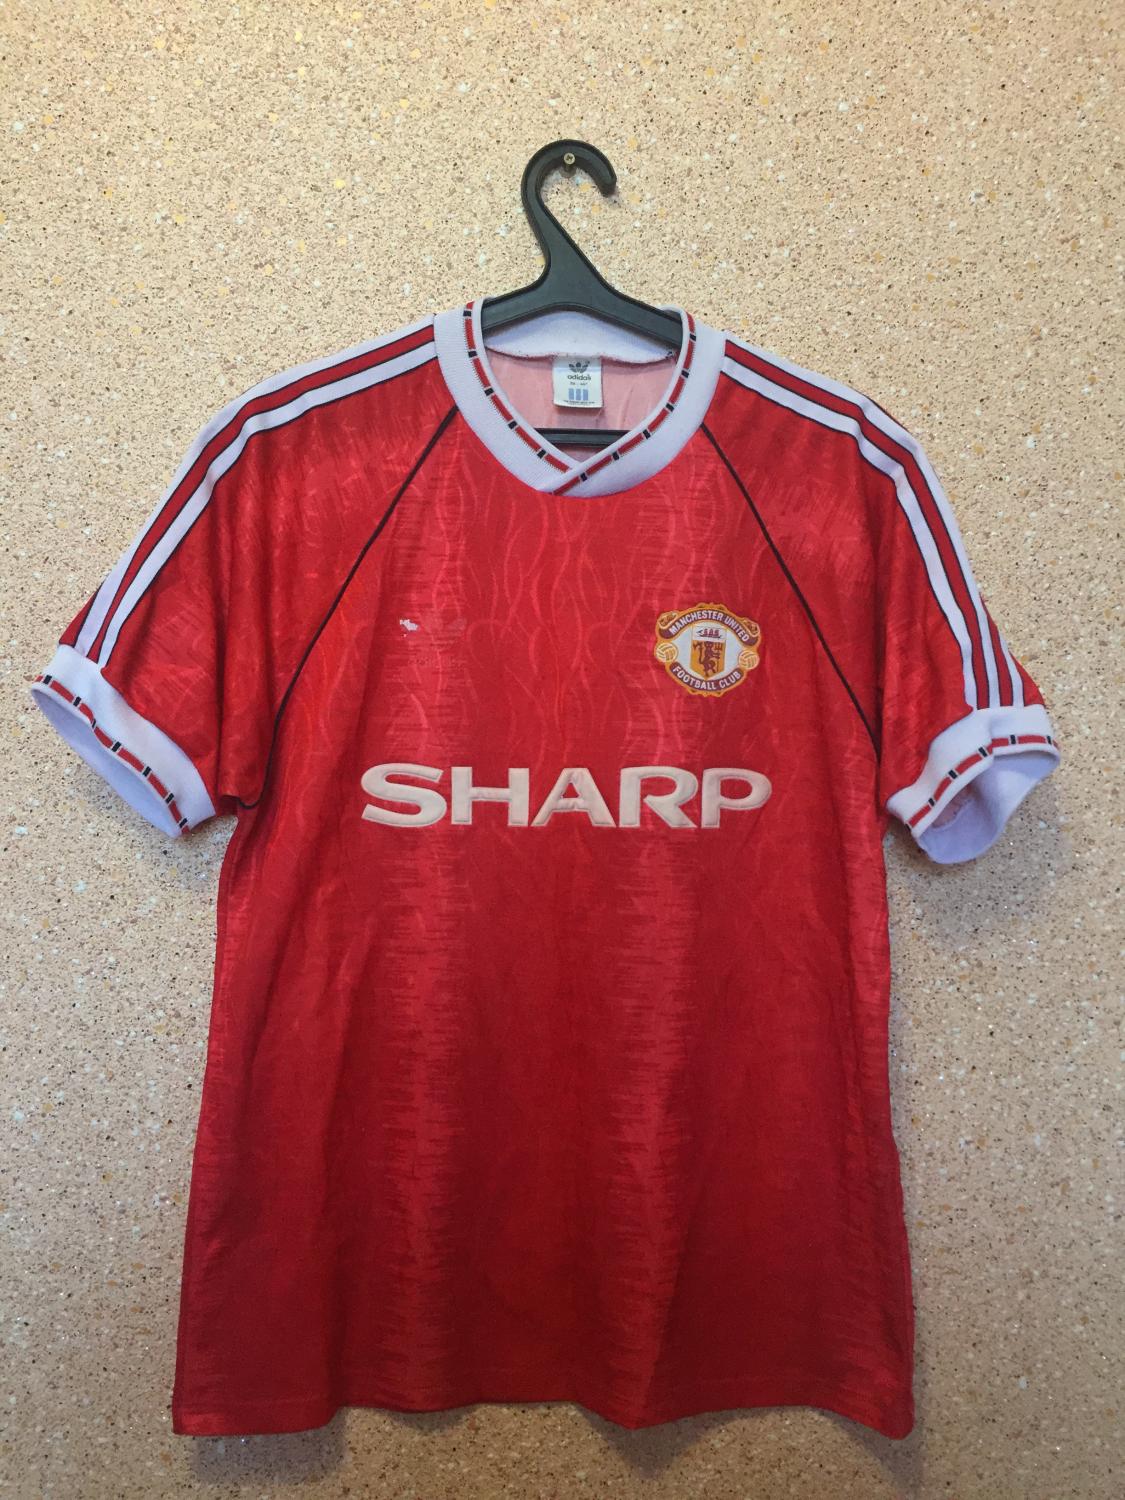 Manchester United Home football shirt 1990 - 1992. Sponsored by Sharp